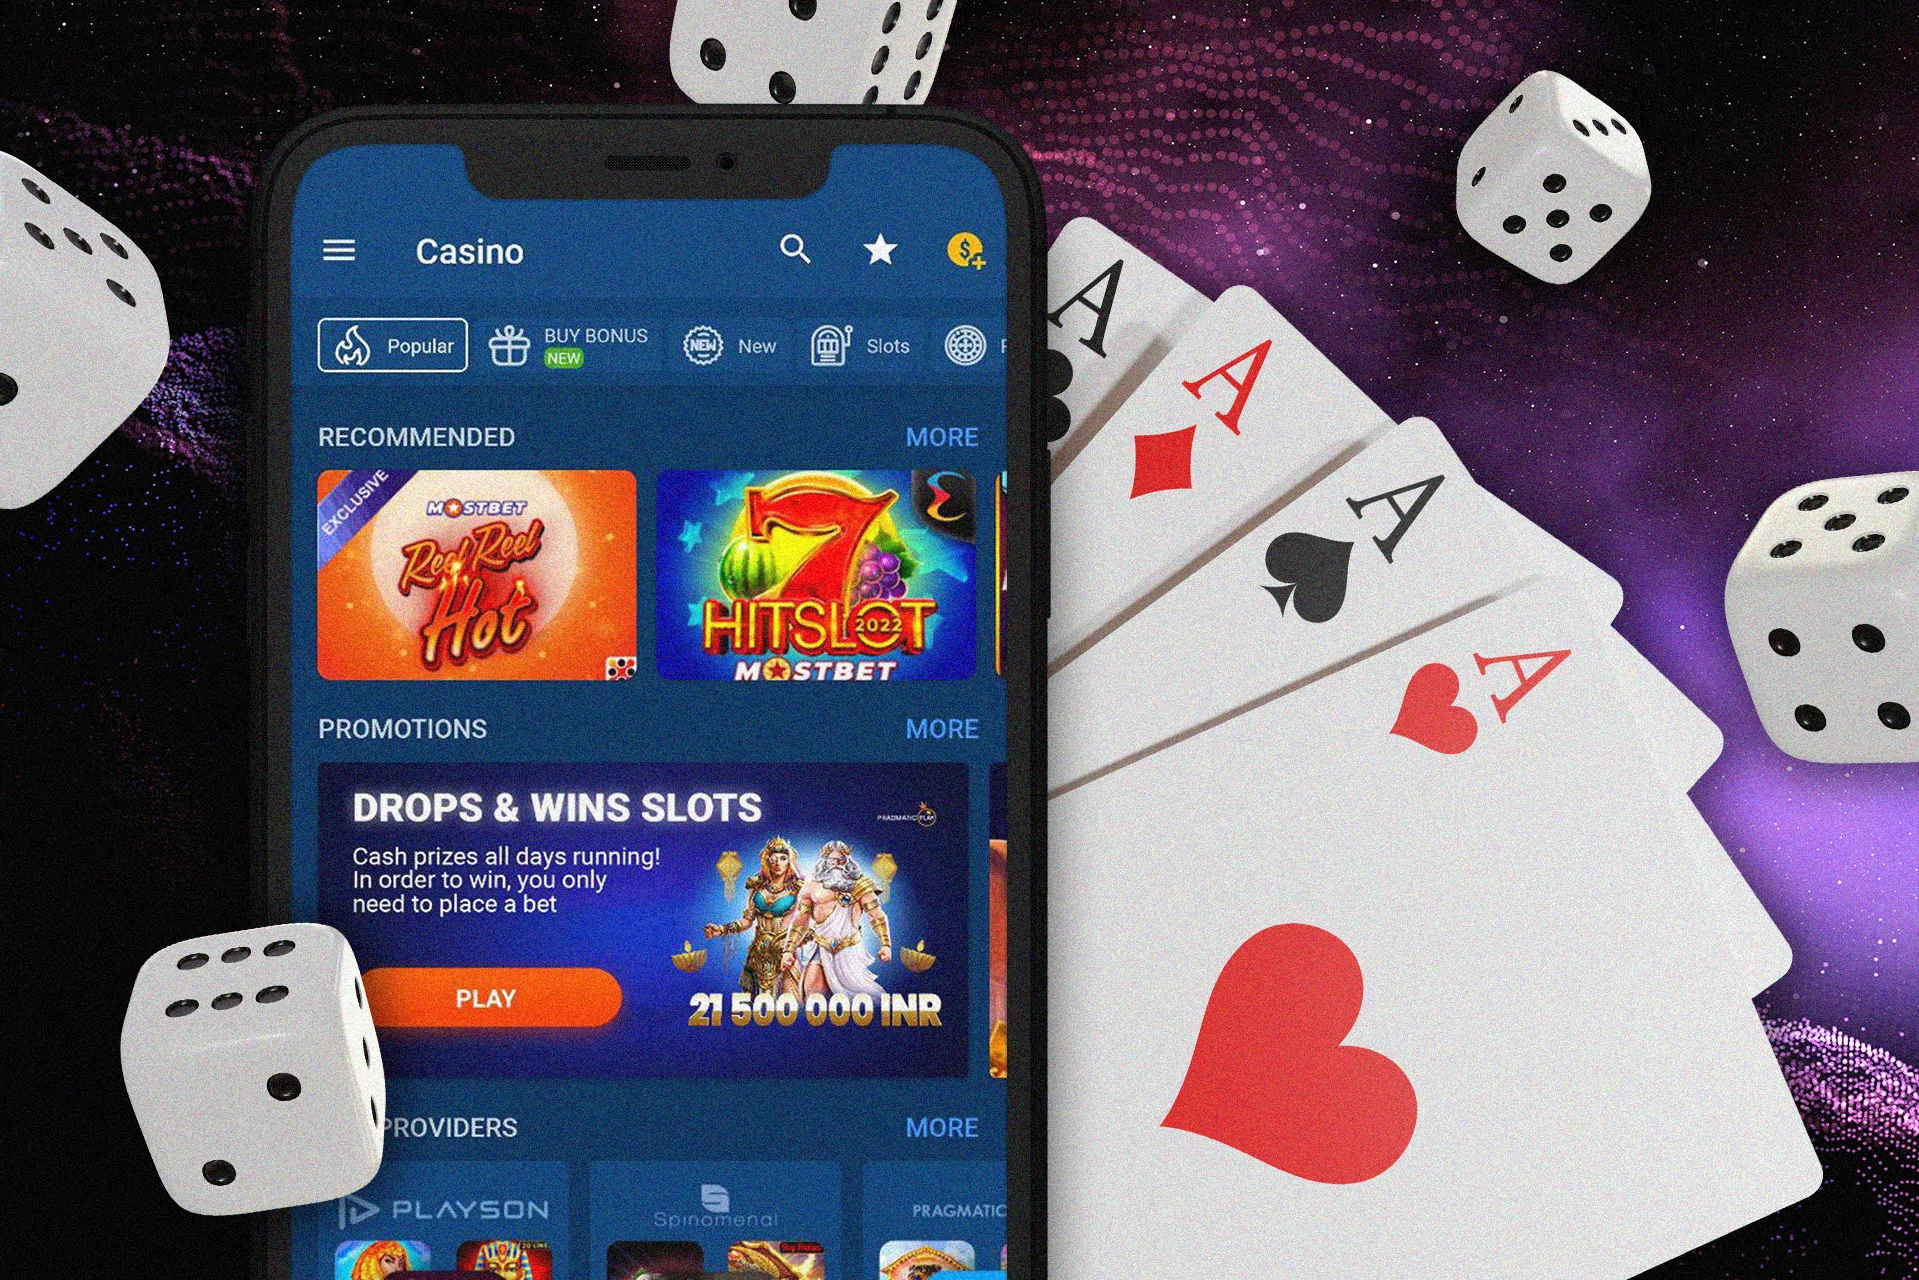 There is a wide range of casino games in the Mostbet app.